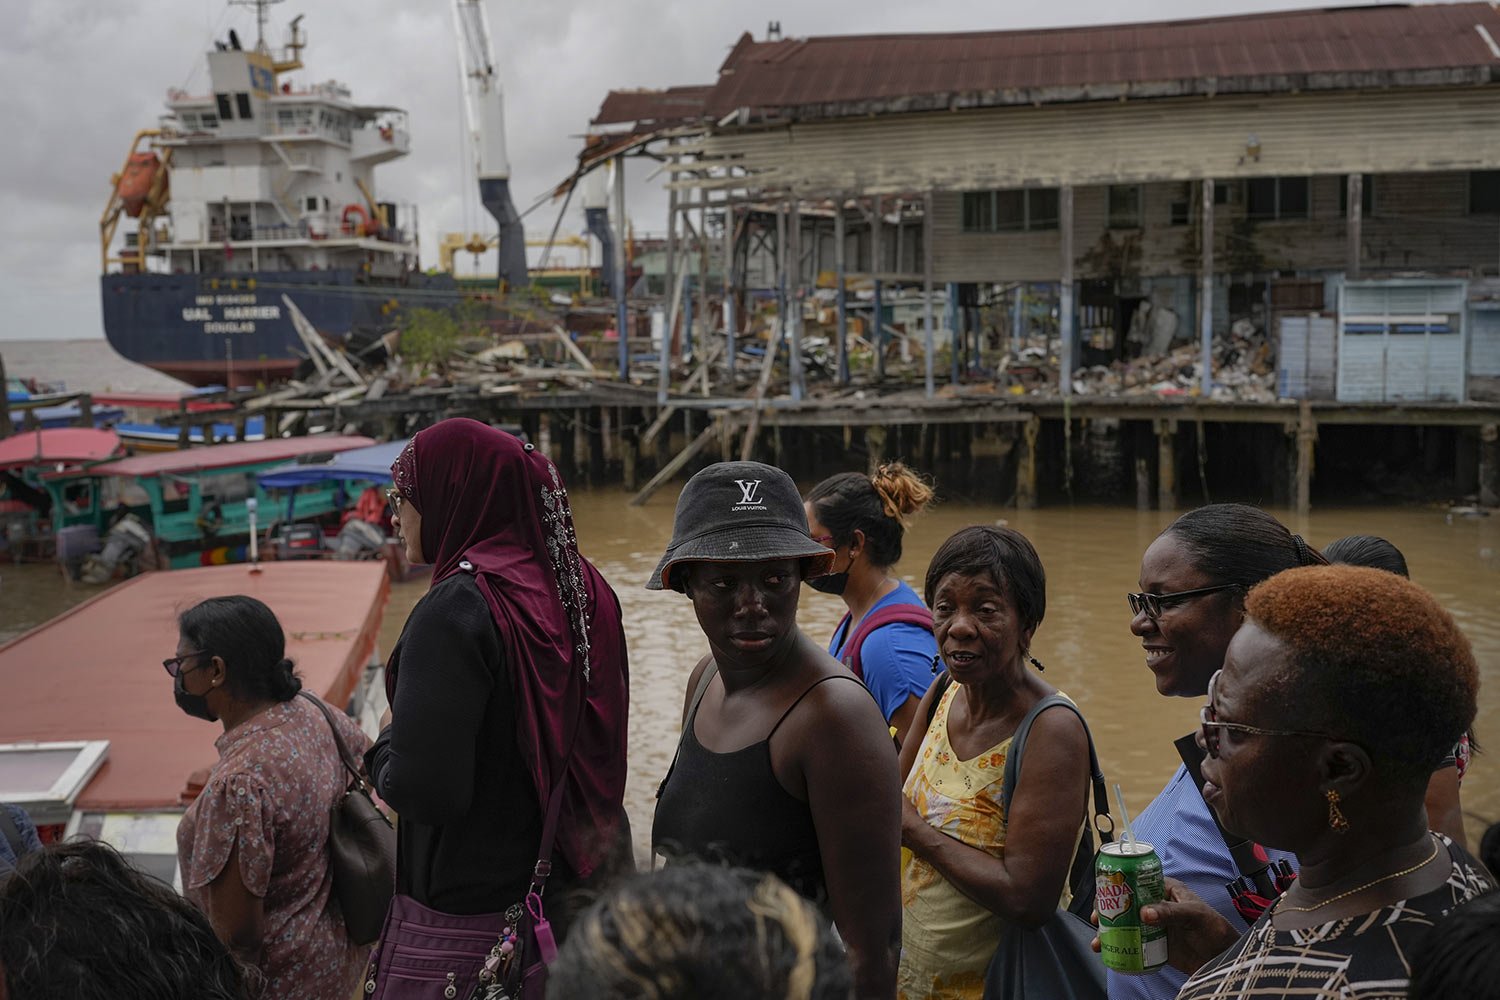  People wait at the Stabroek Market to ferry across the Demerara River, as a container ship is anchored behind them in Georgetown, Guyana, April 12, 2023. Guayana is poised to become the world’s fourth-largest offshore oil producer, placing it ahead 